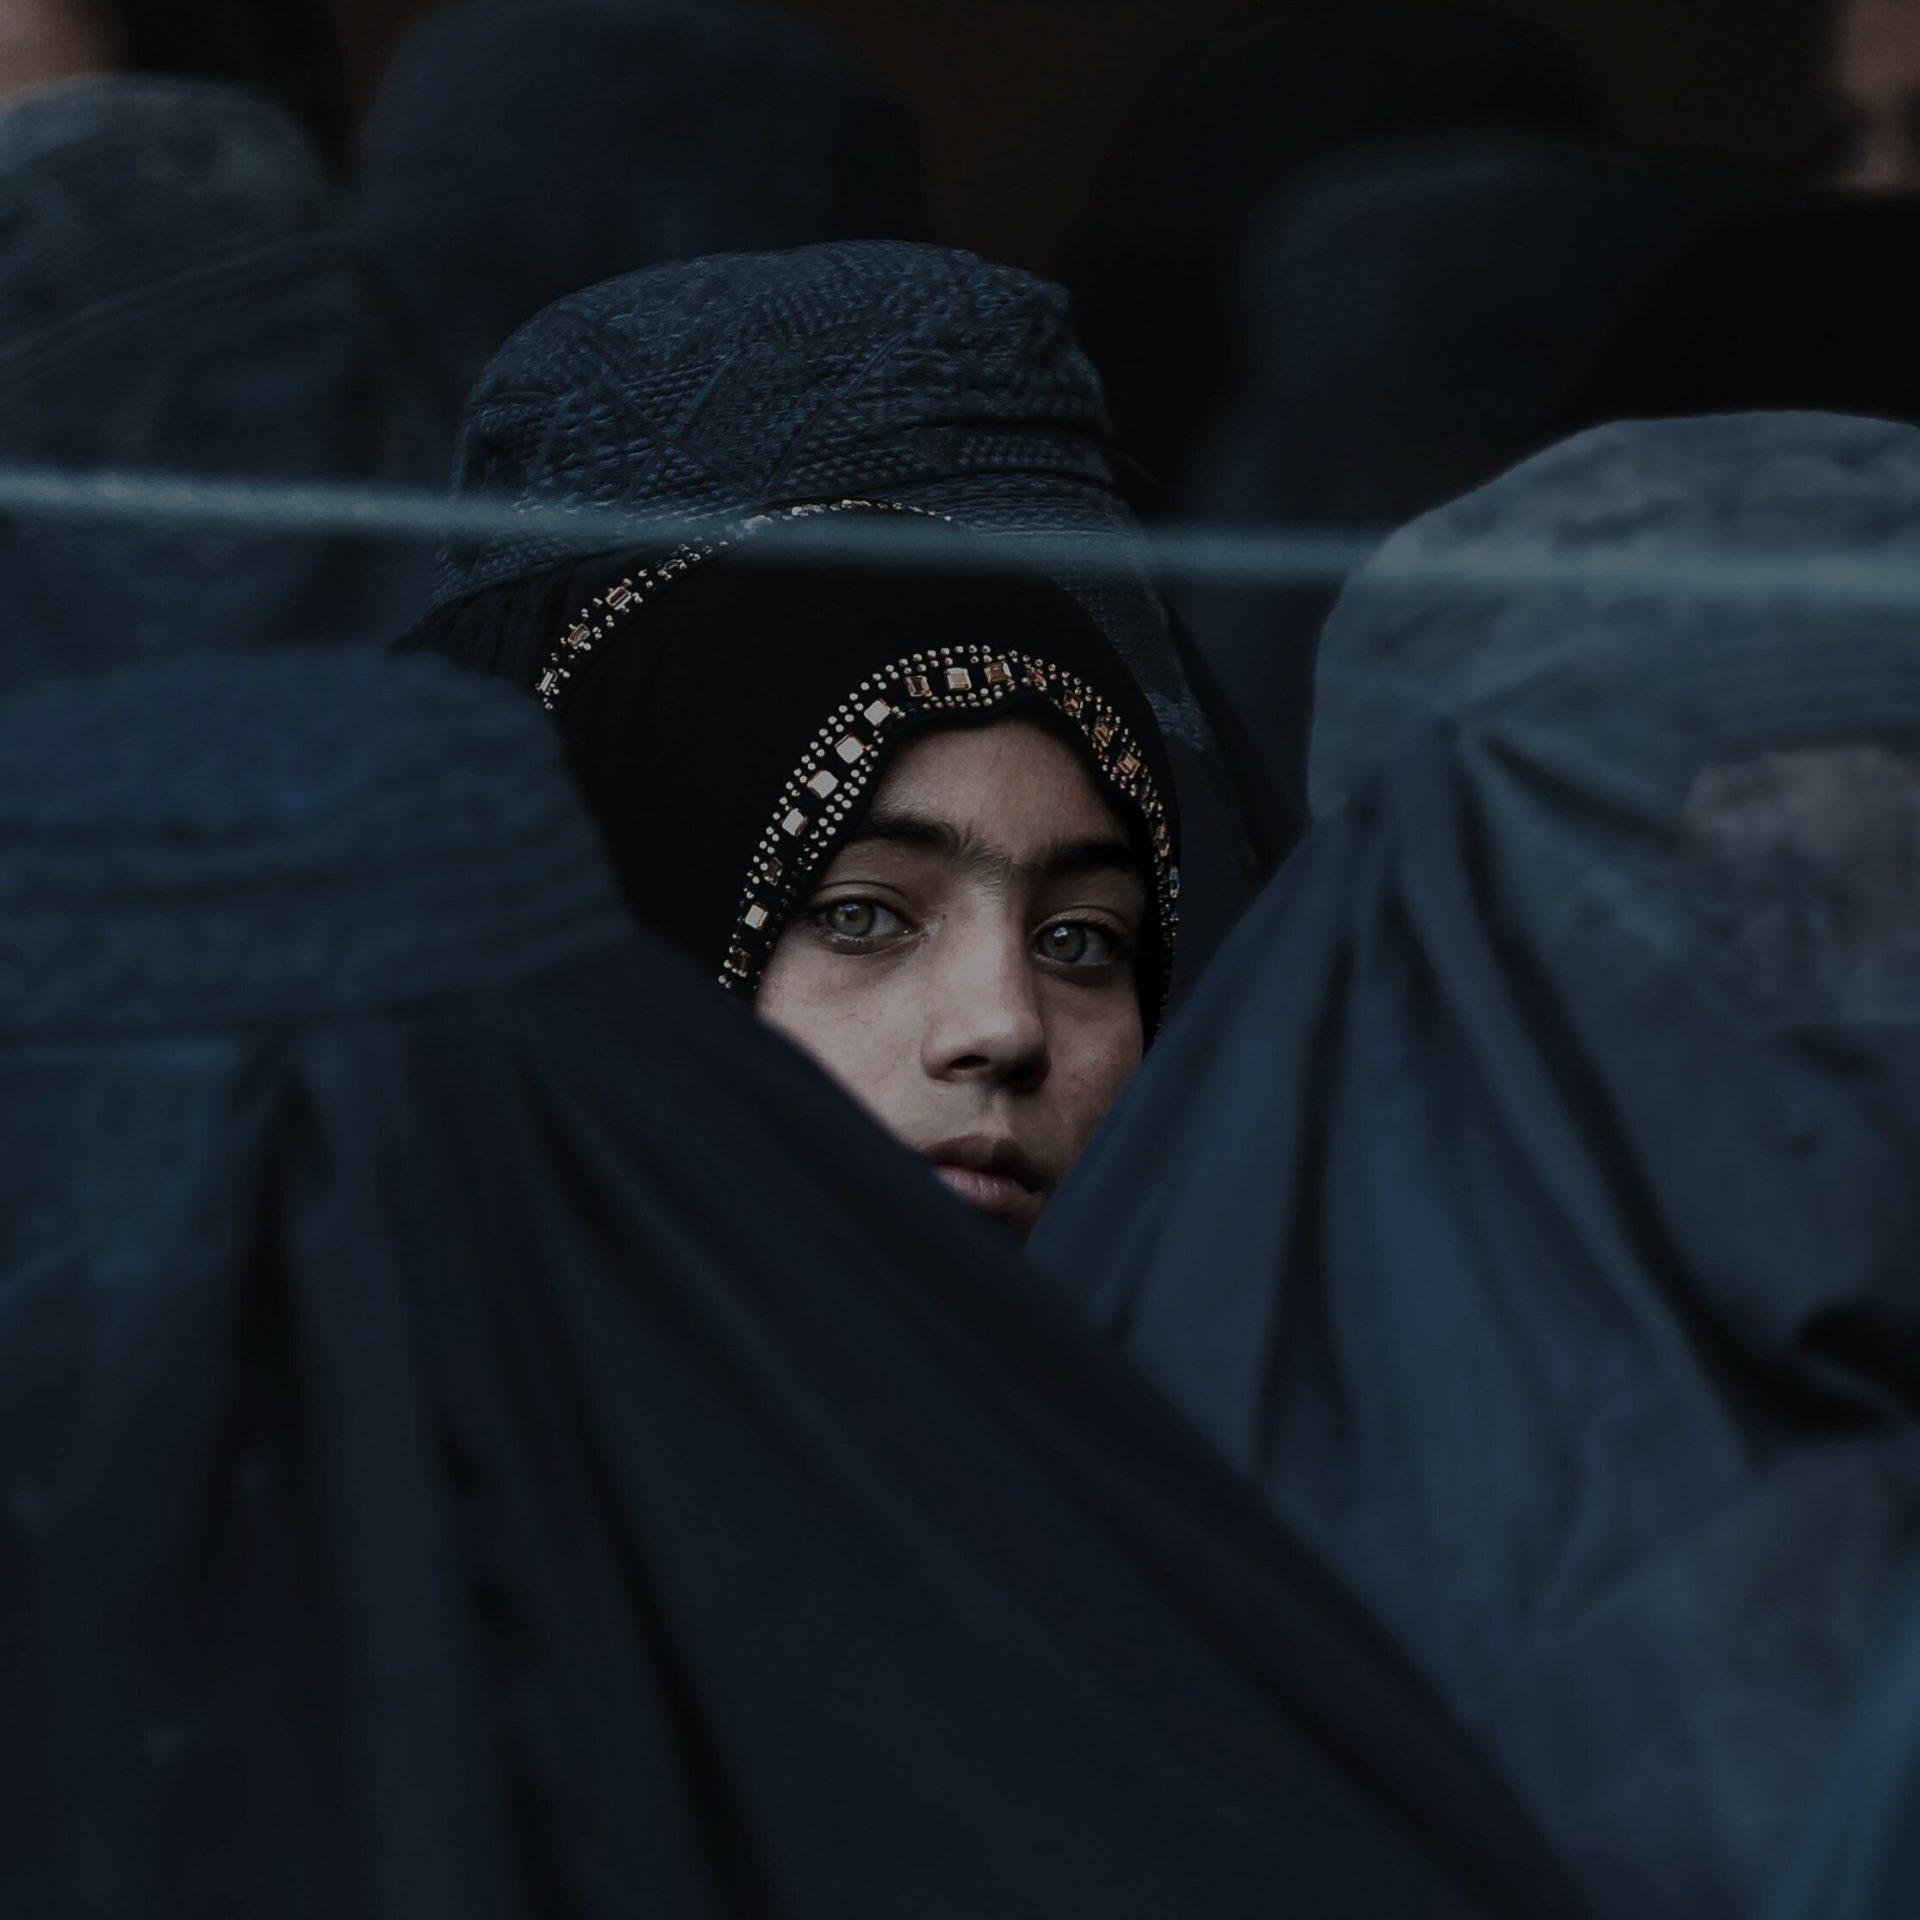 Jalalabad, Afghanistan – A girl looks on among Afghan women lining up to receive relief assistance during the holy month of Ramadan. (Photo by Isaak Alexandre Karslian | Unsplash)